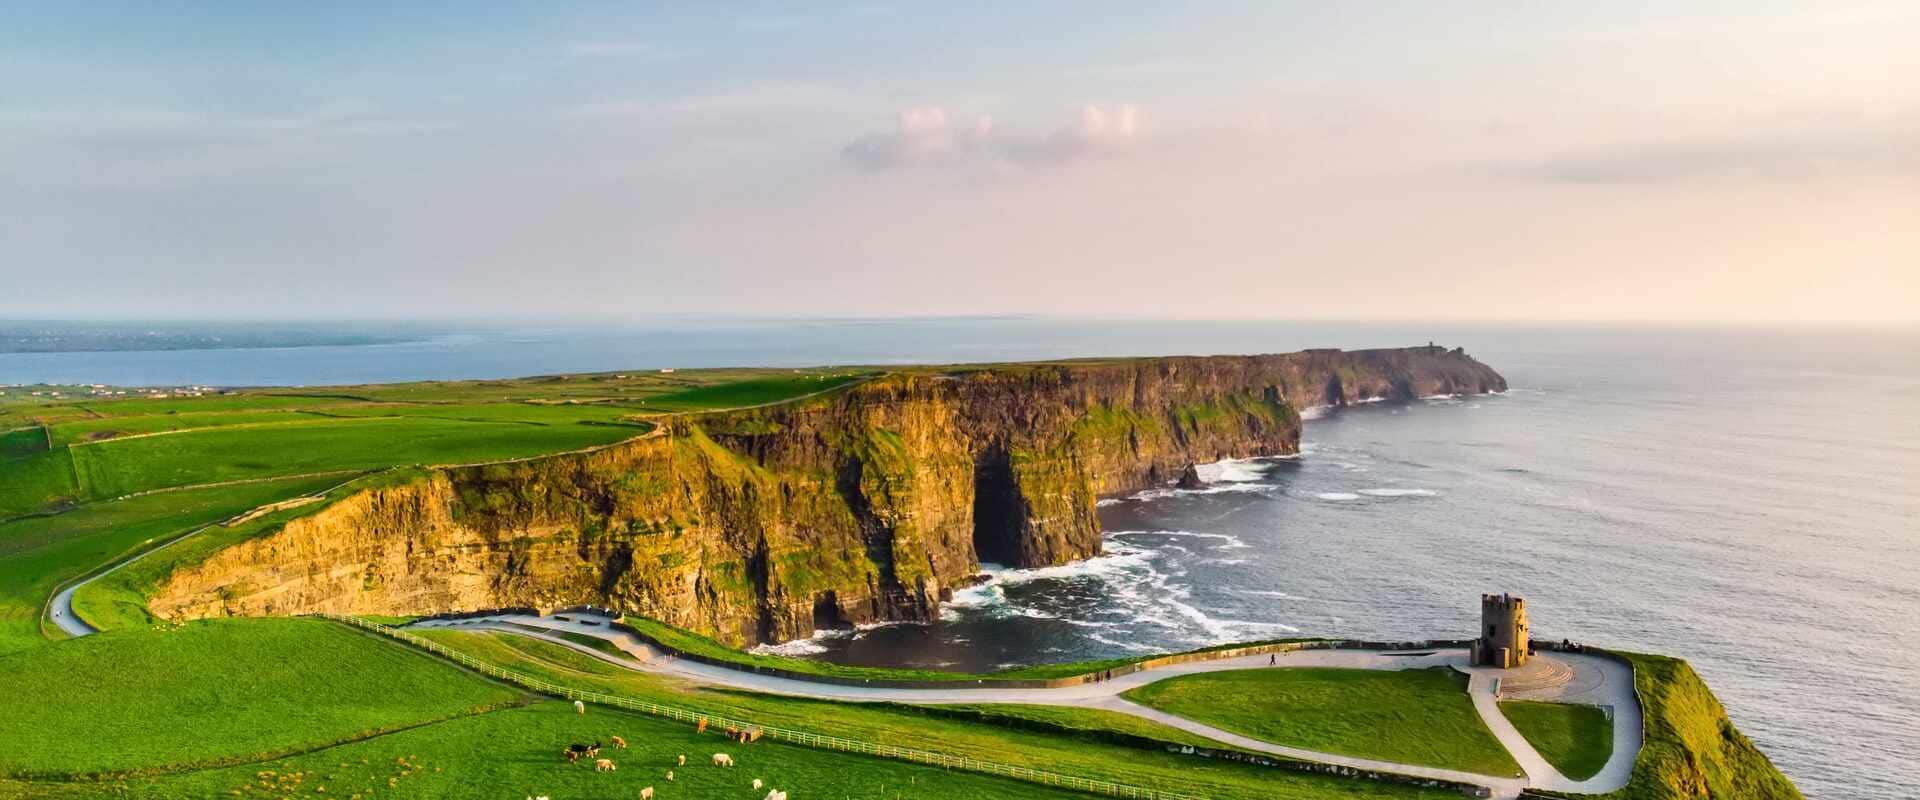 The rugged Cliffs of Moher, Ireland